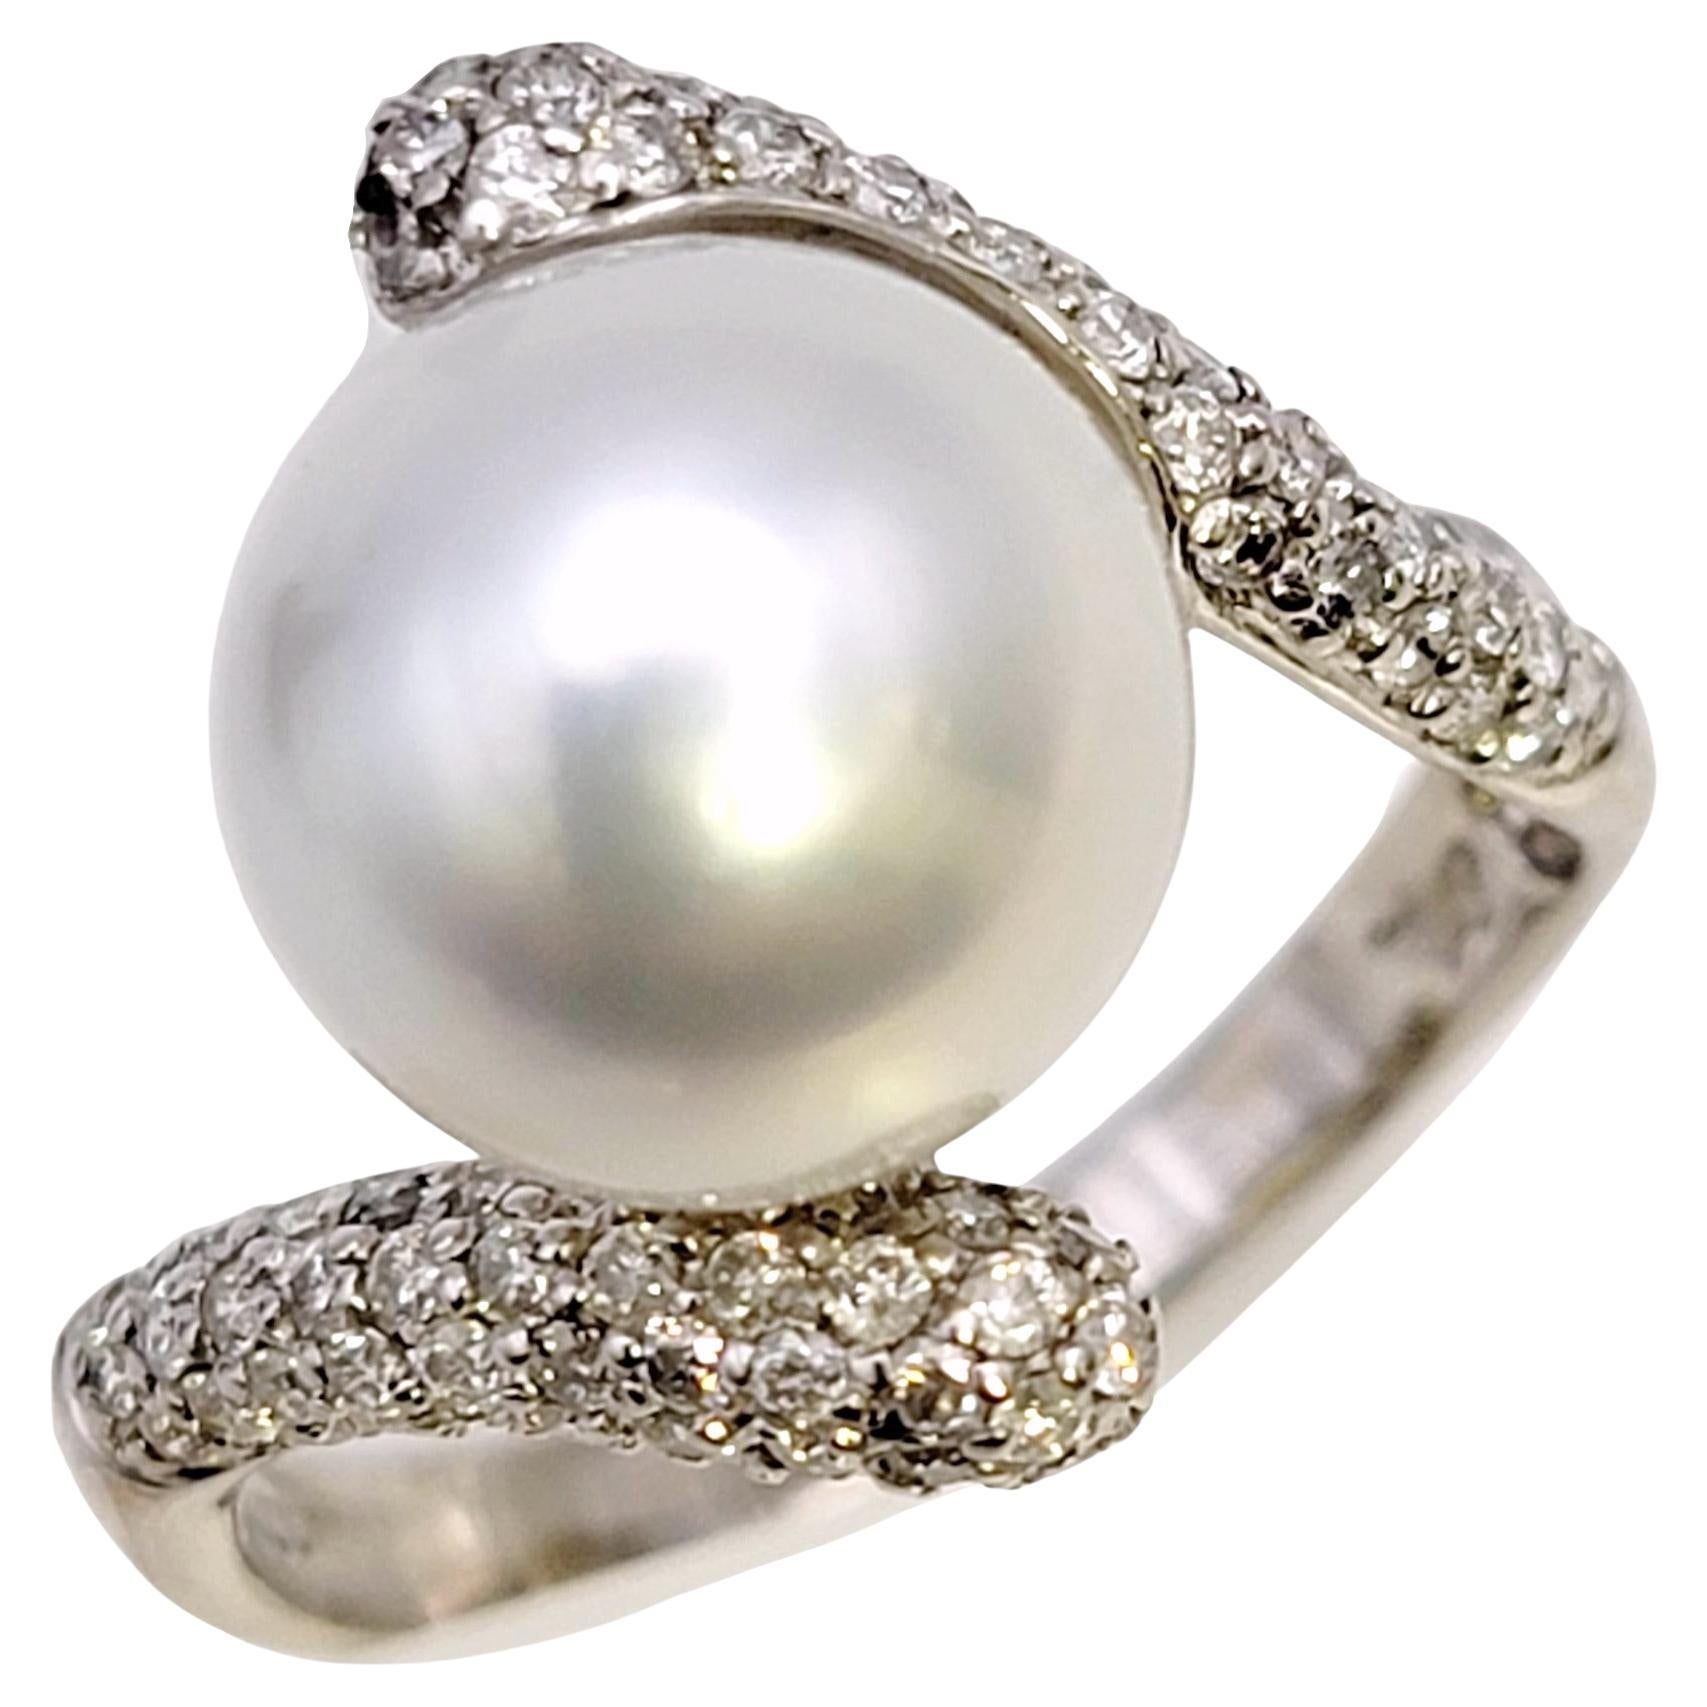 Ring size: 10.75

It doesn't get any more classic than the elegant combination of diamonds and pearls, and this piece certainly does not disappoint! This unique, beautiful ring with a modern twist is truly a piece that you will cherish for years to